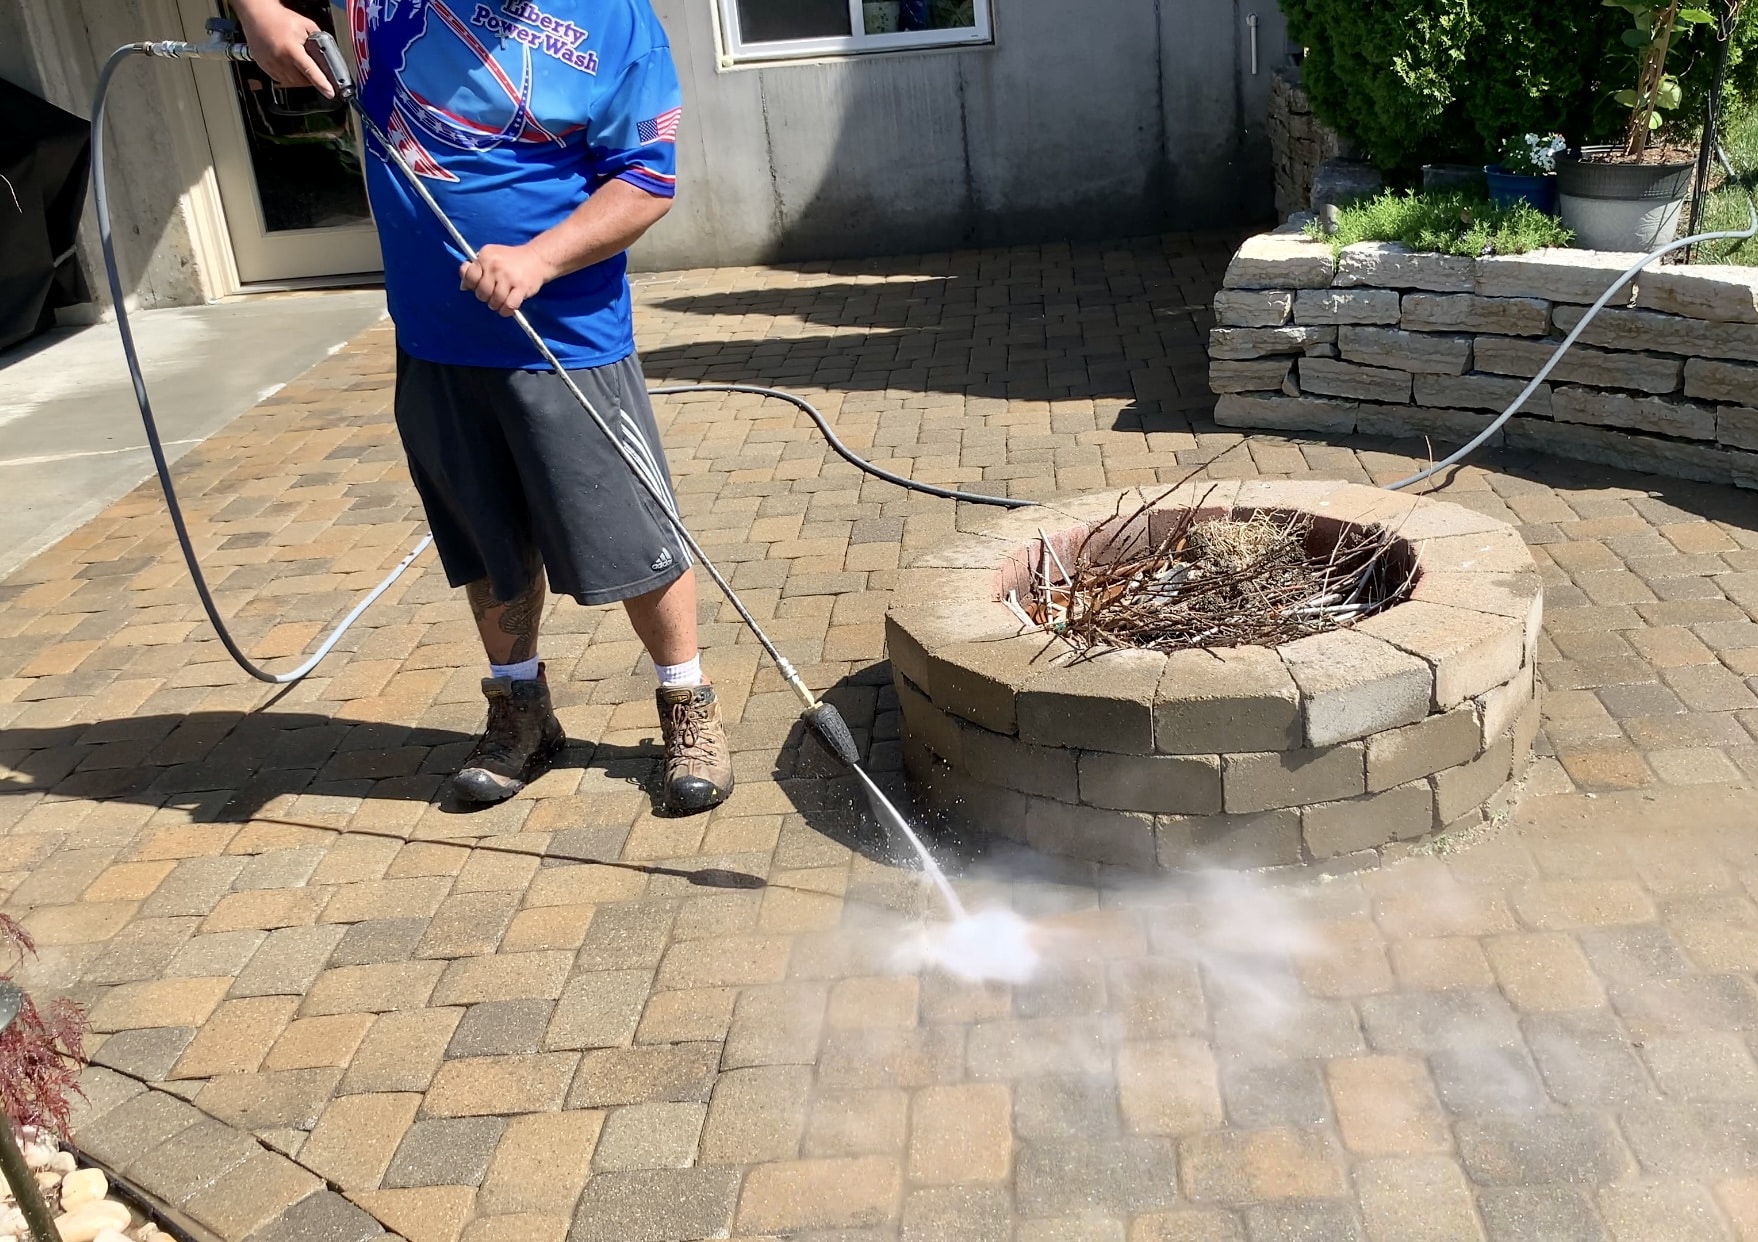 Your Local Indian Hill, Oh Experts In Power Washing